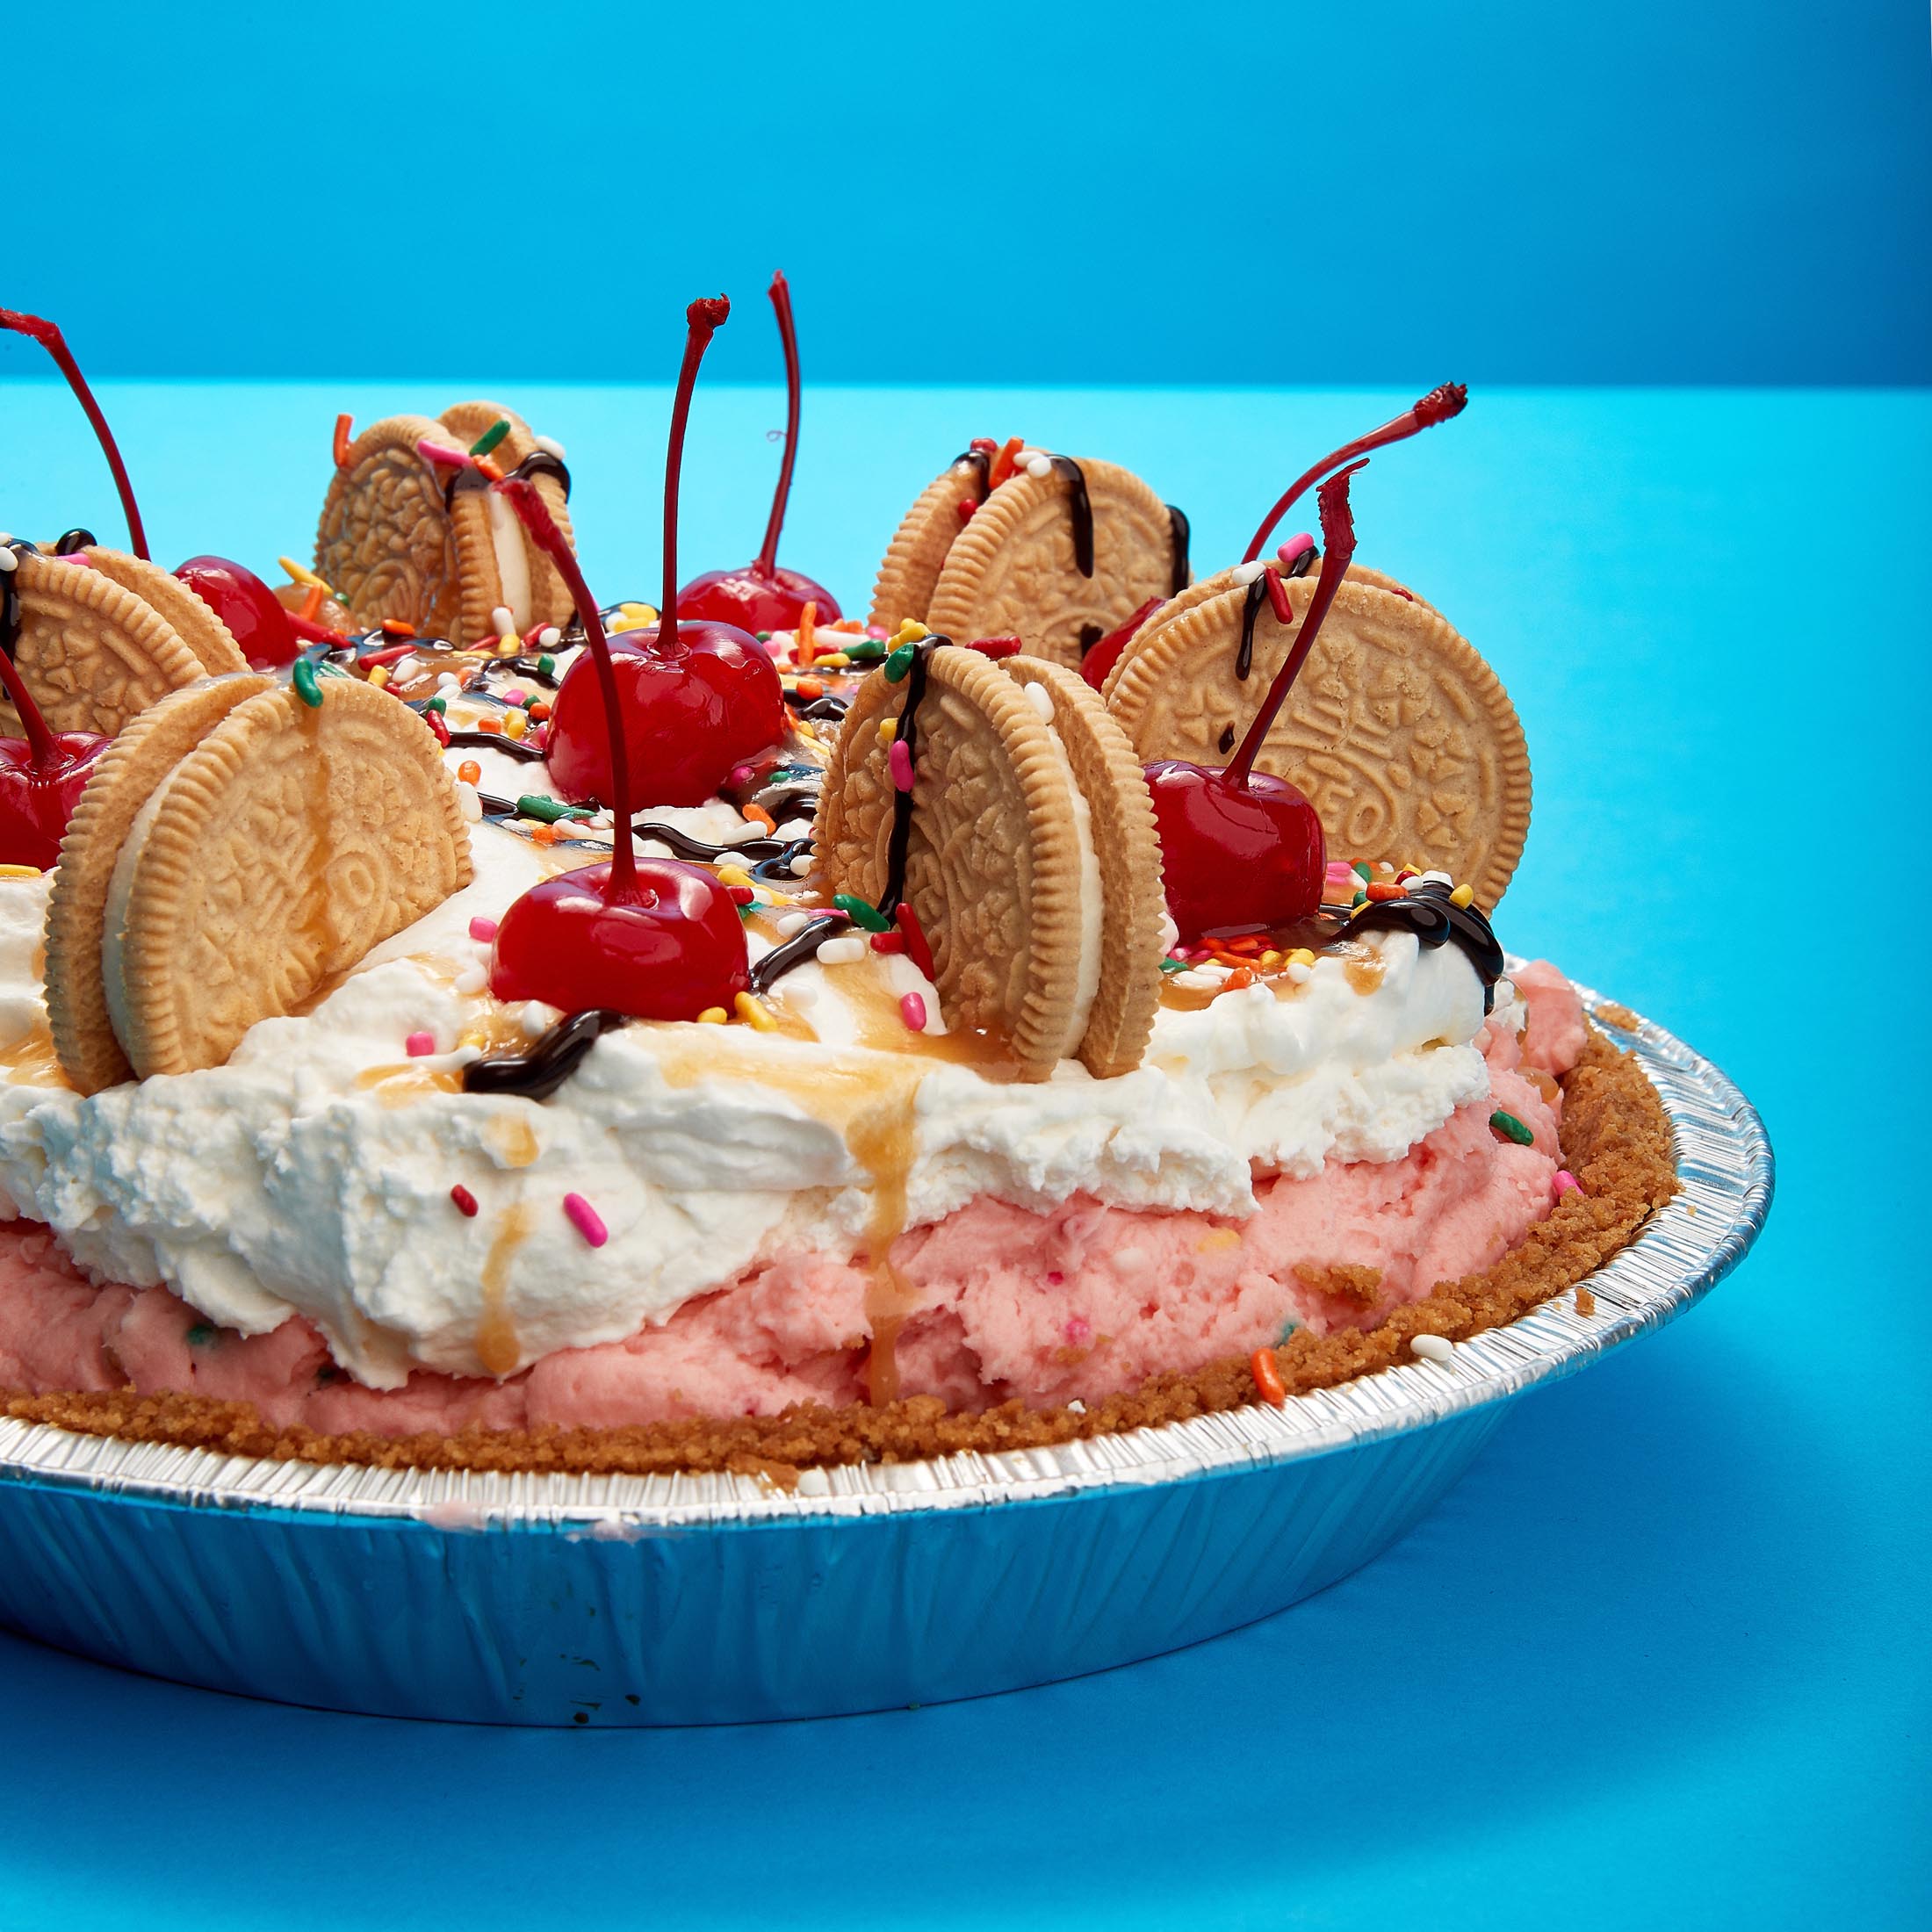 You’ve Got To See How This Ice Cream Sundae Pie Is Made